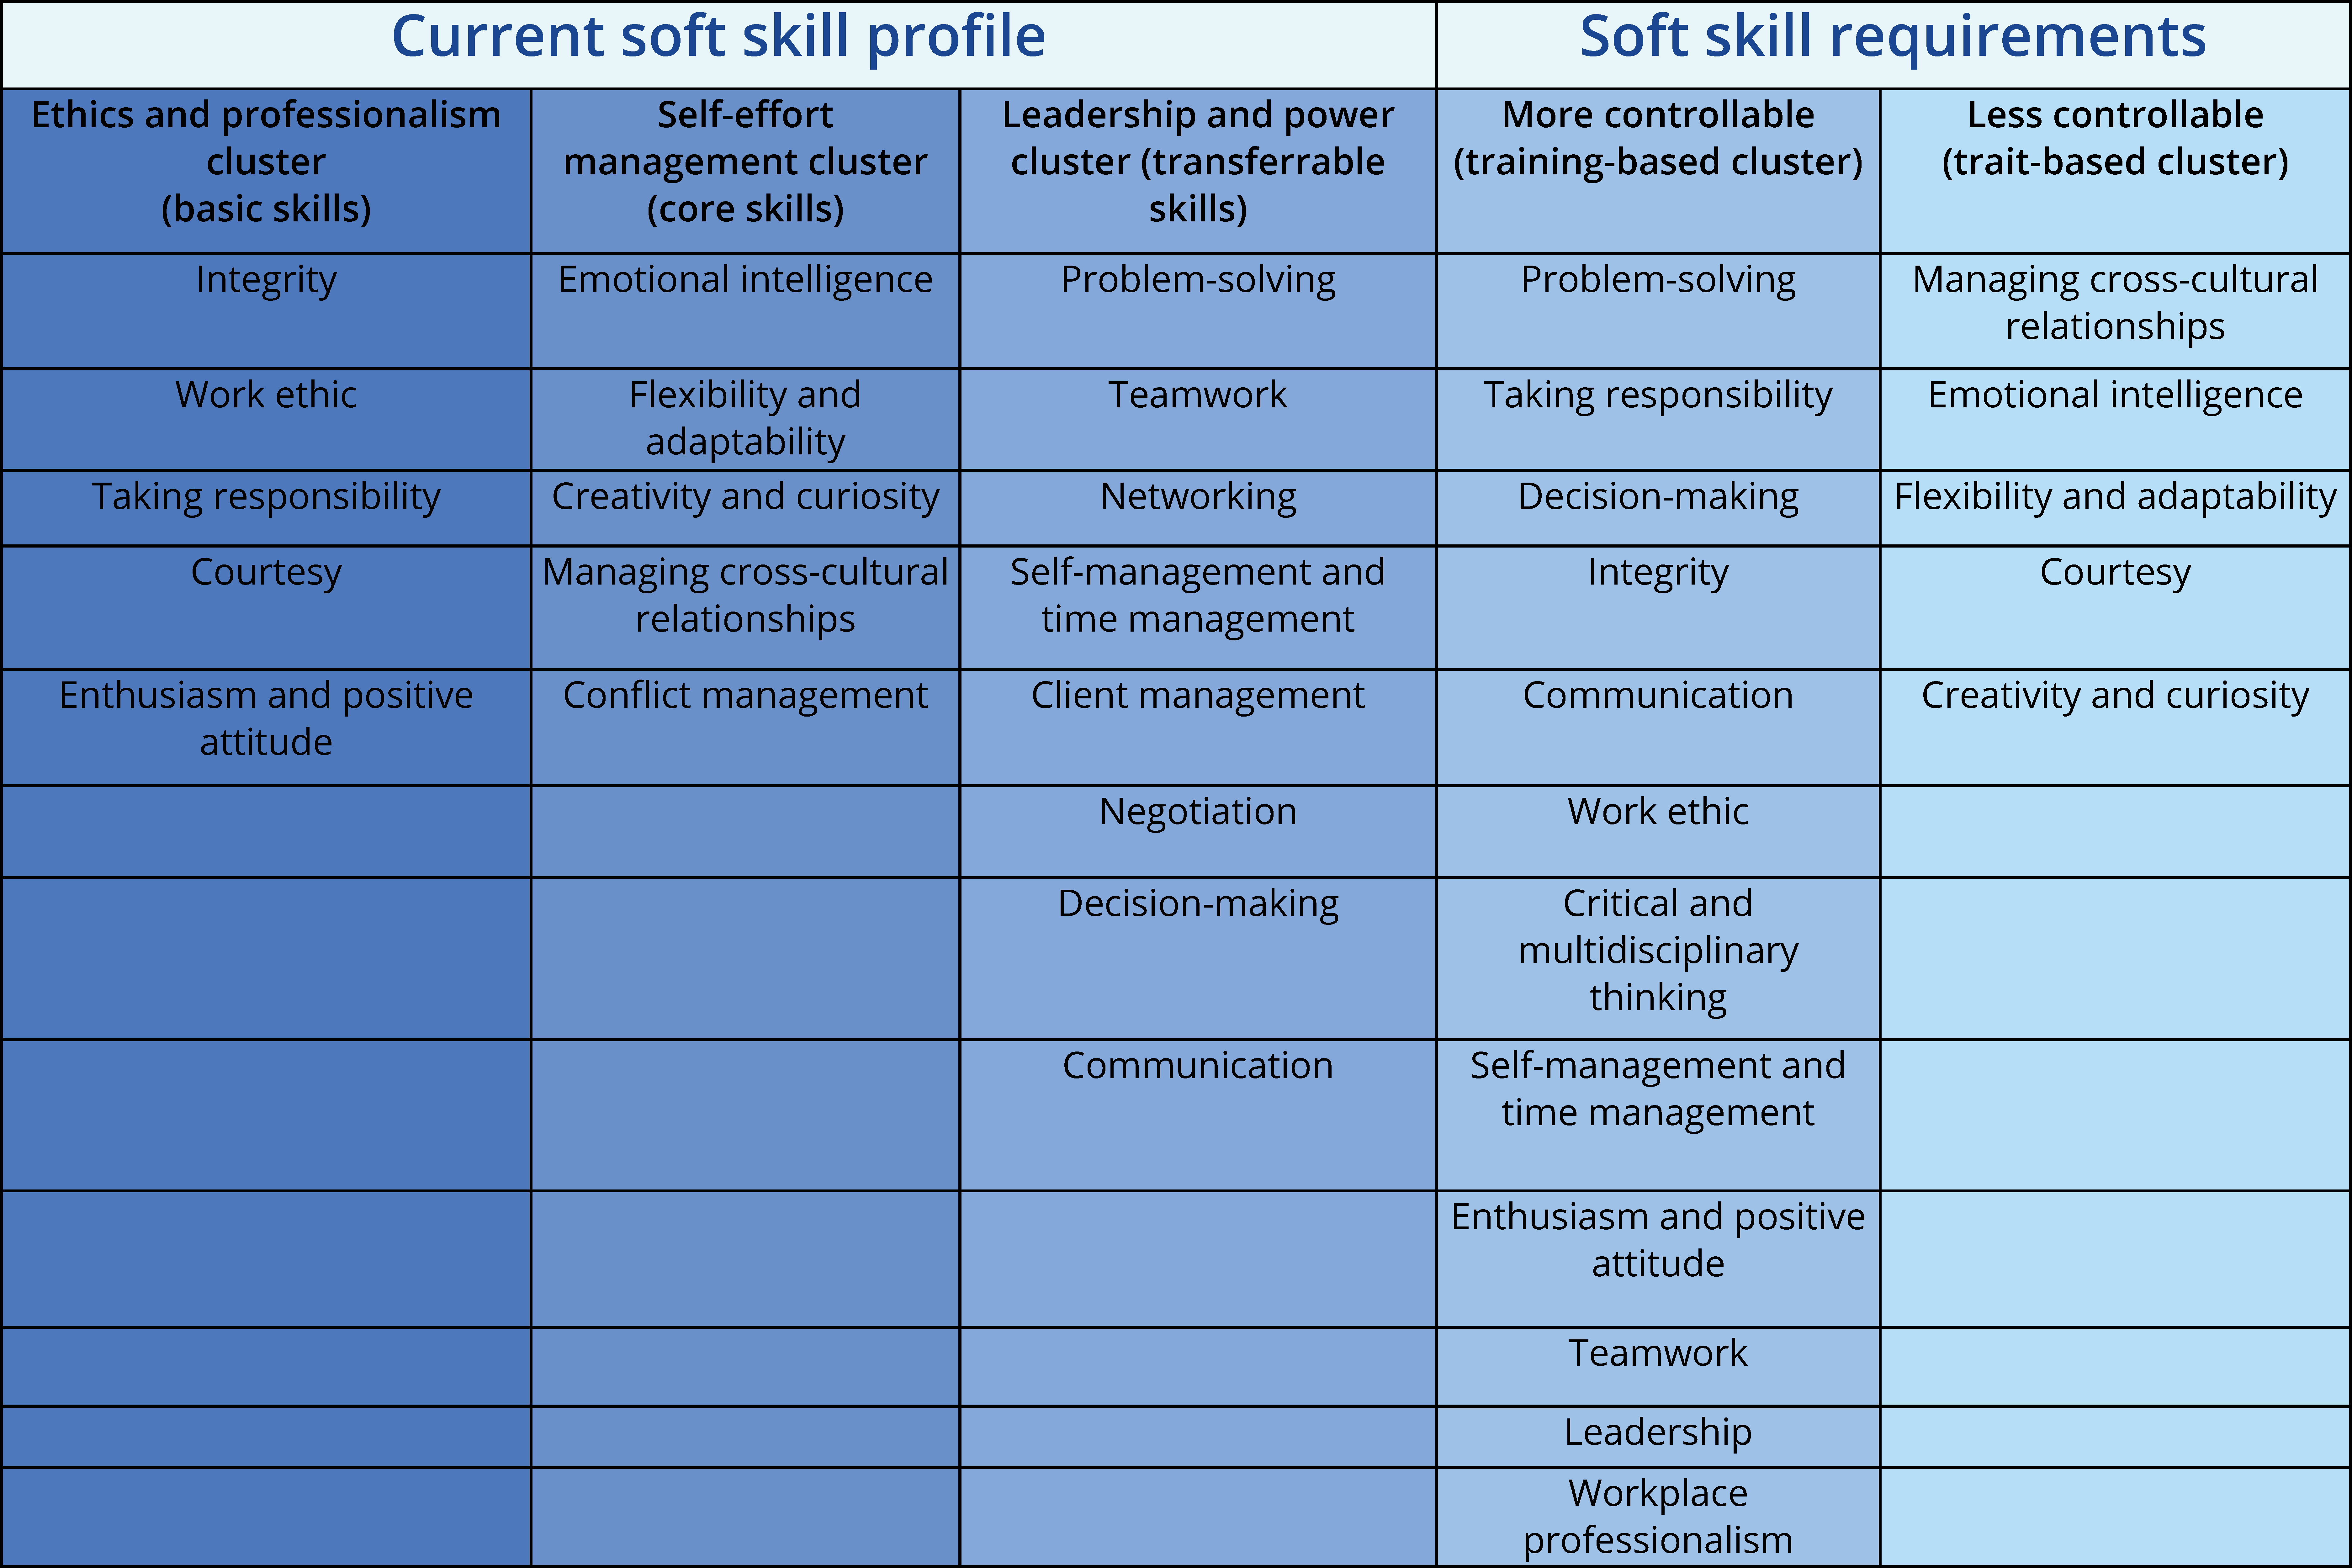 Table illustrating the current soft skill profile of candidates and the requirements of businesses